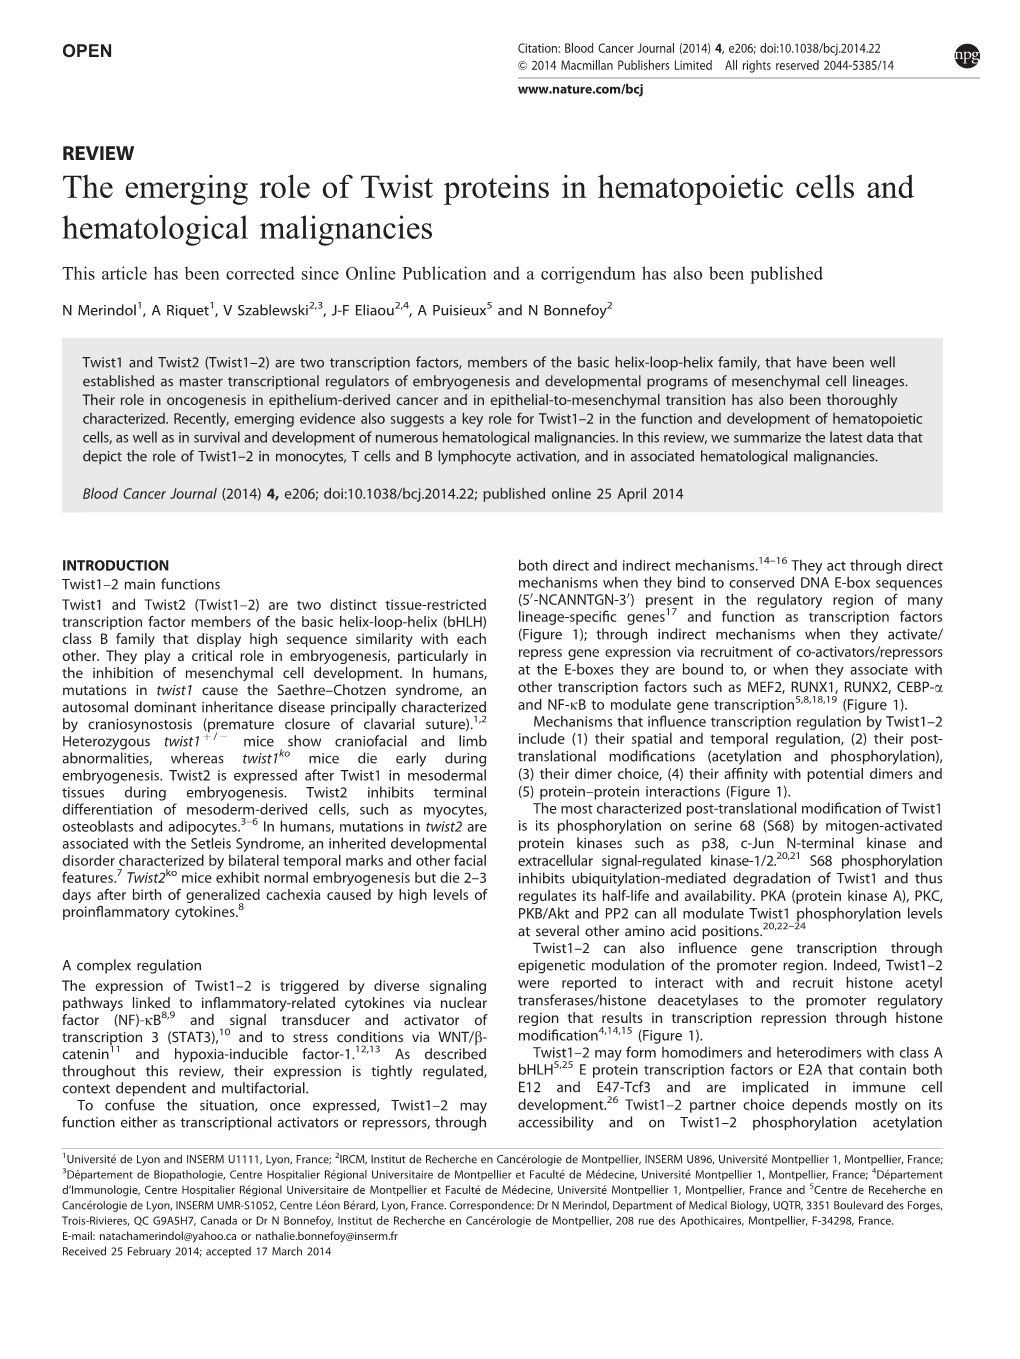 The Emerging Role of Twist Proteins in Hematopoietic Cells and Hematological Malignancies